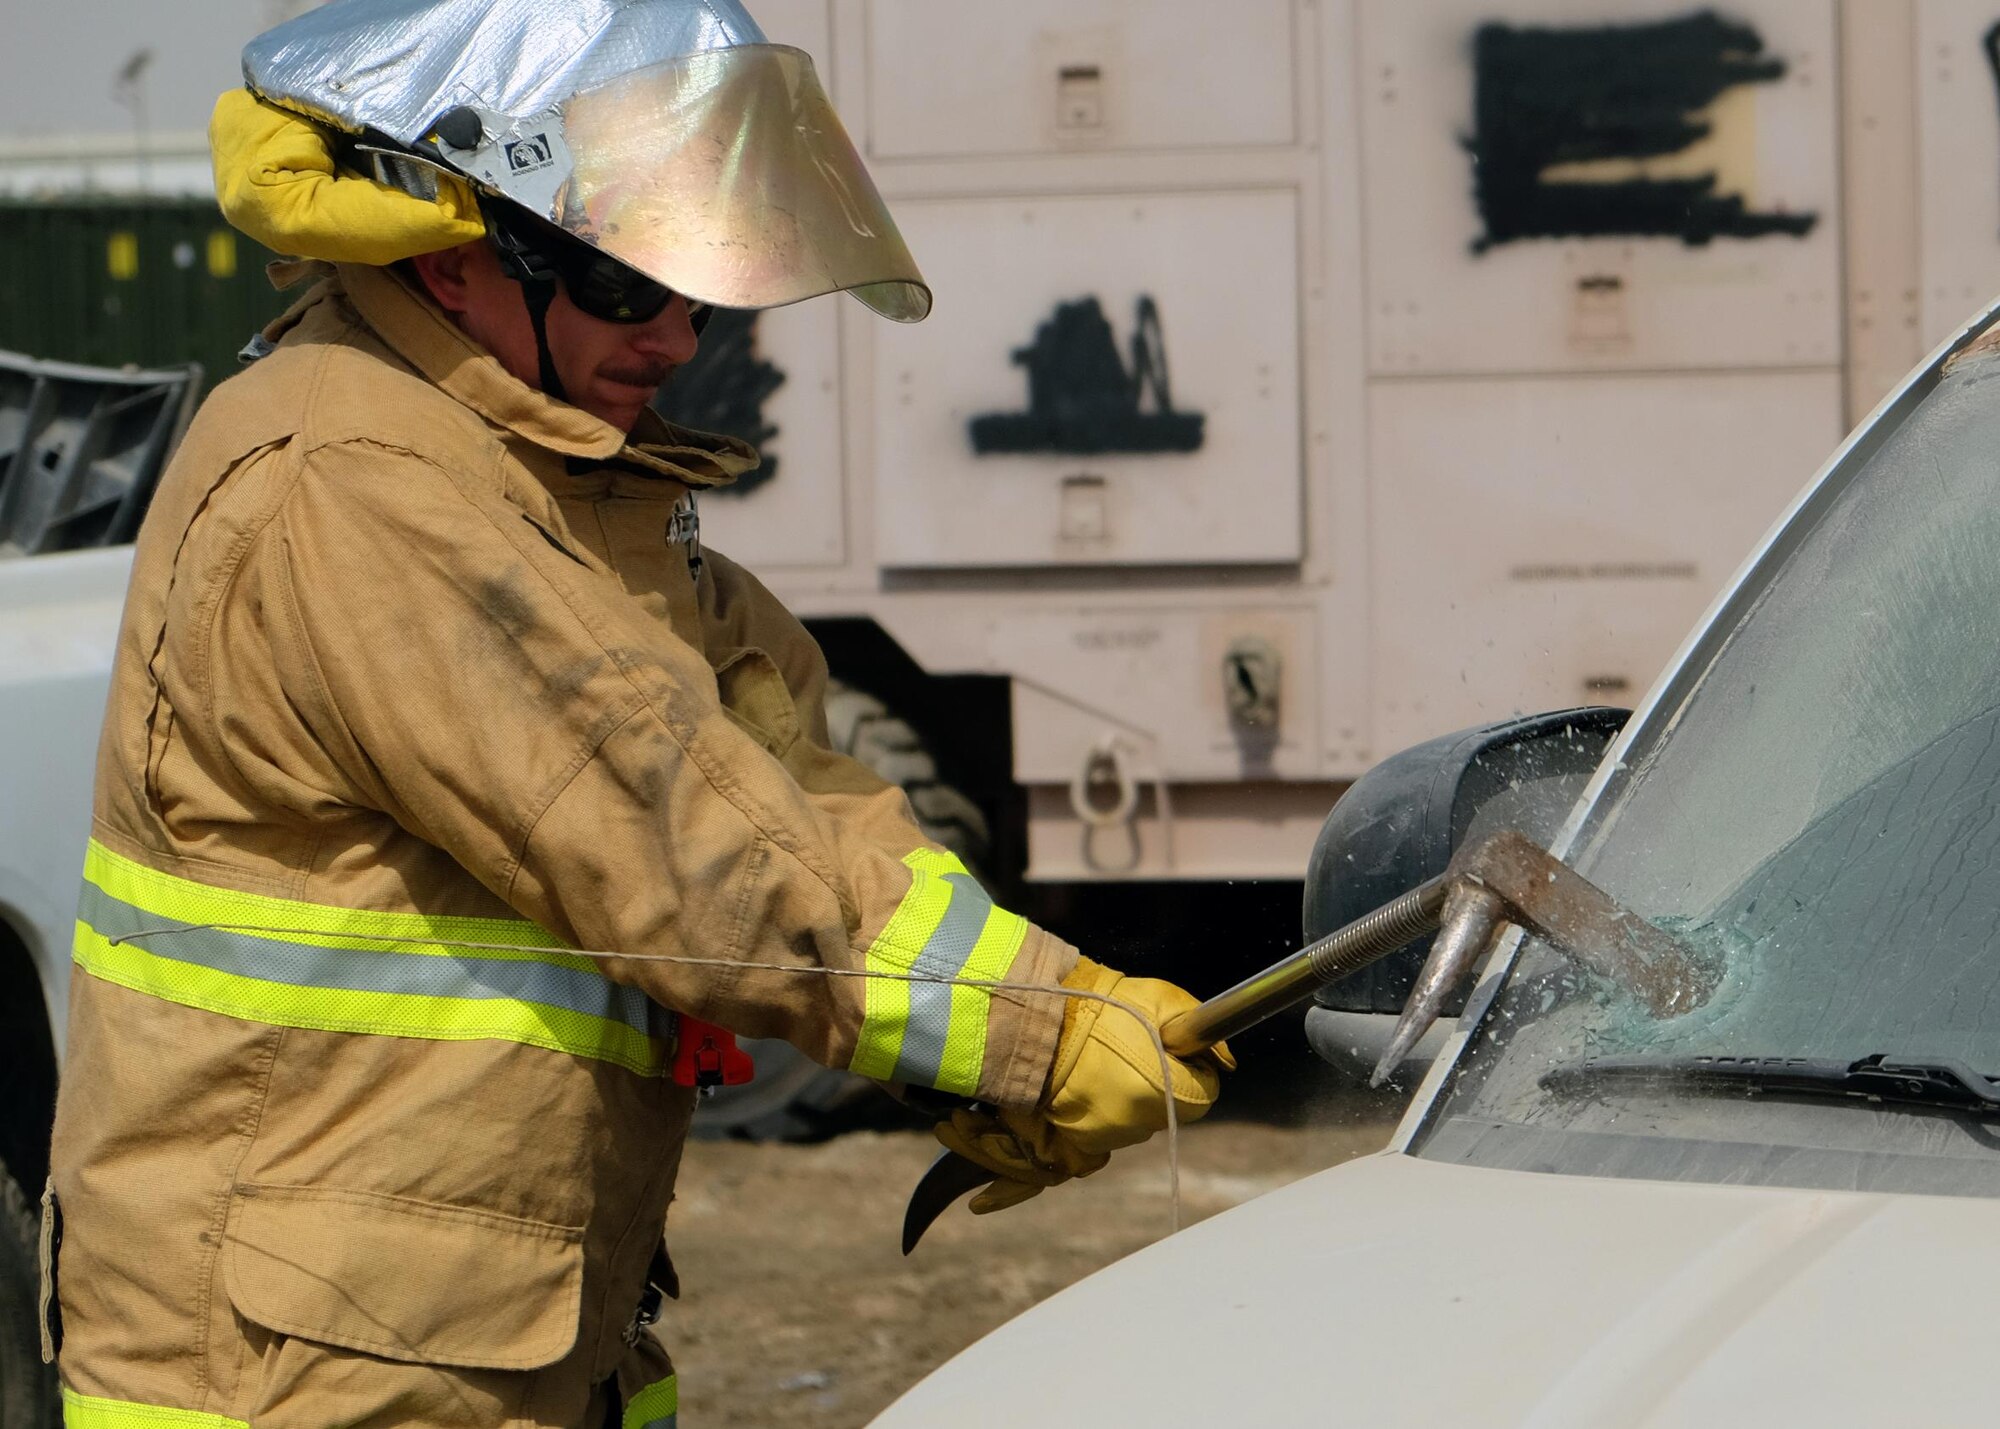 Master Sgt. Anthony, 380th Expeditionary Civil Engineer Squadron Fire Department NCO in charge of training, punctures a windshield June 23, 2017, at an undisclosed location in southwest Asia. Windshields and other glass were removed prior to vehicle extrication training for safety. (U.S. Air Force photo by Senior Airman Preston Webb)